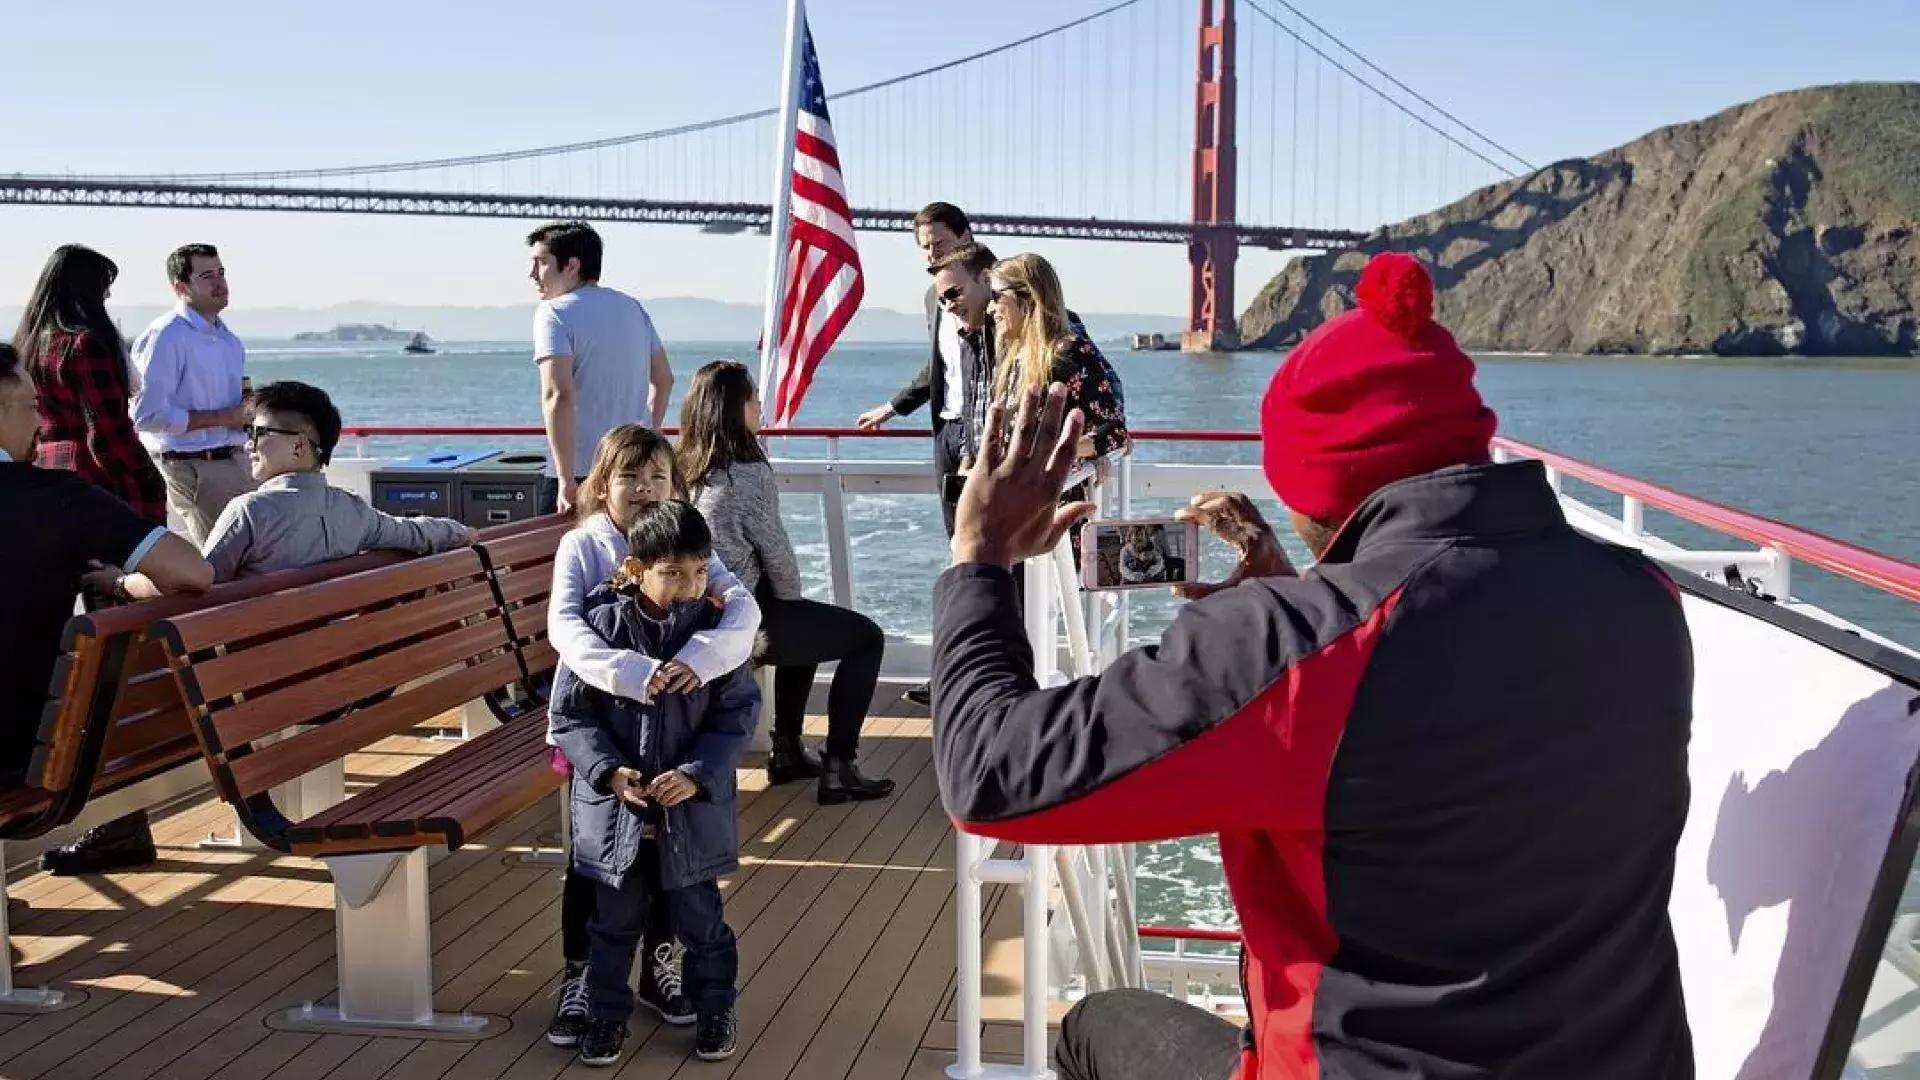 A family enjoys a cruise on the bay, passing the Golden Gate Bridge.